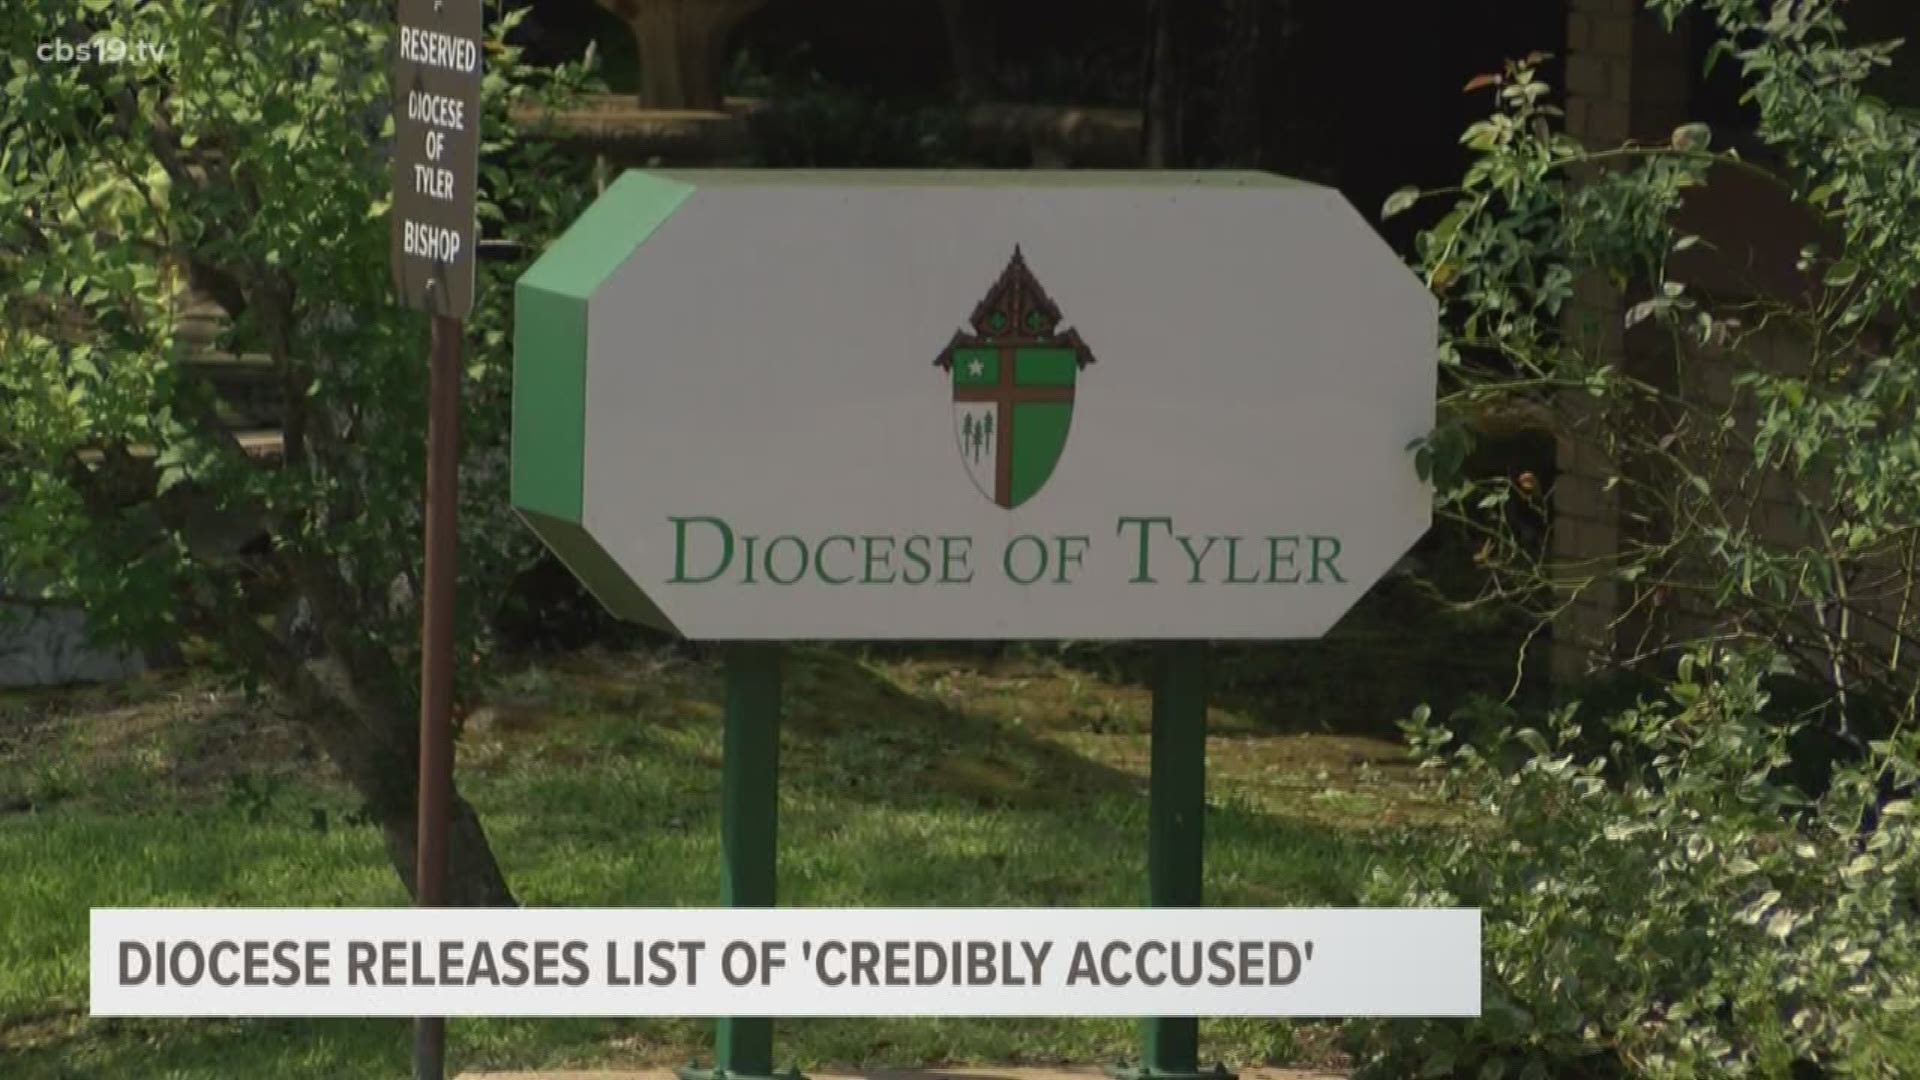 Gustavo de Jesus Cuello was listed as one of three priests in the Diocese of Tyler with credible accusations of sexual assault of a minor. He is currently serving a life sentence in jail.